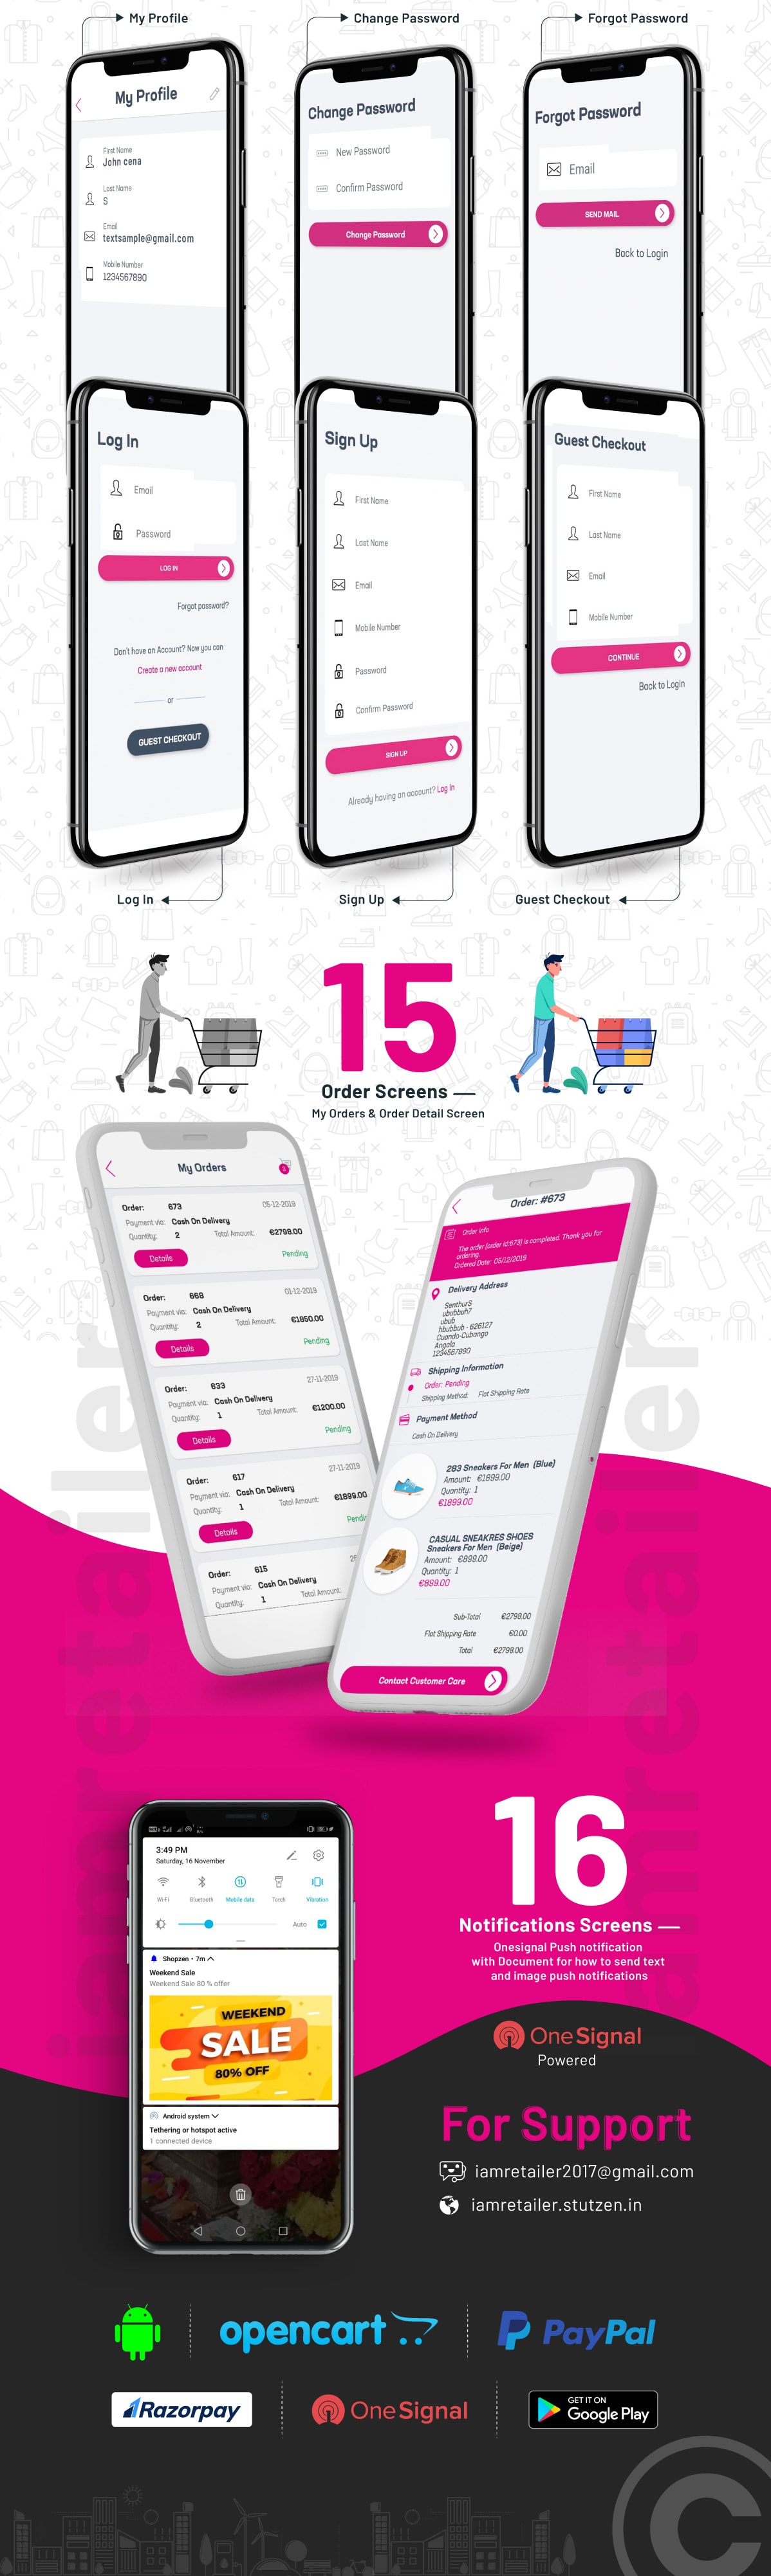 i.am.retailer - Android Shopping App powered by Opencart - 10